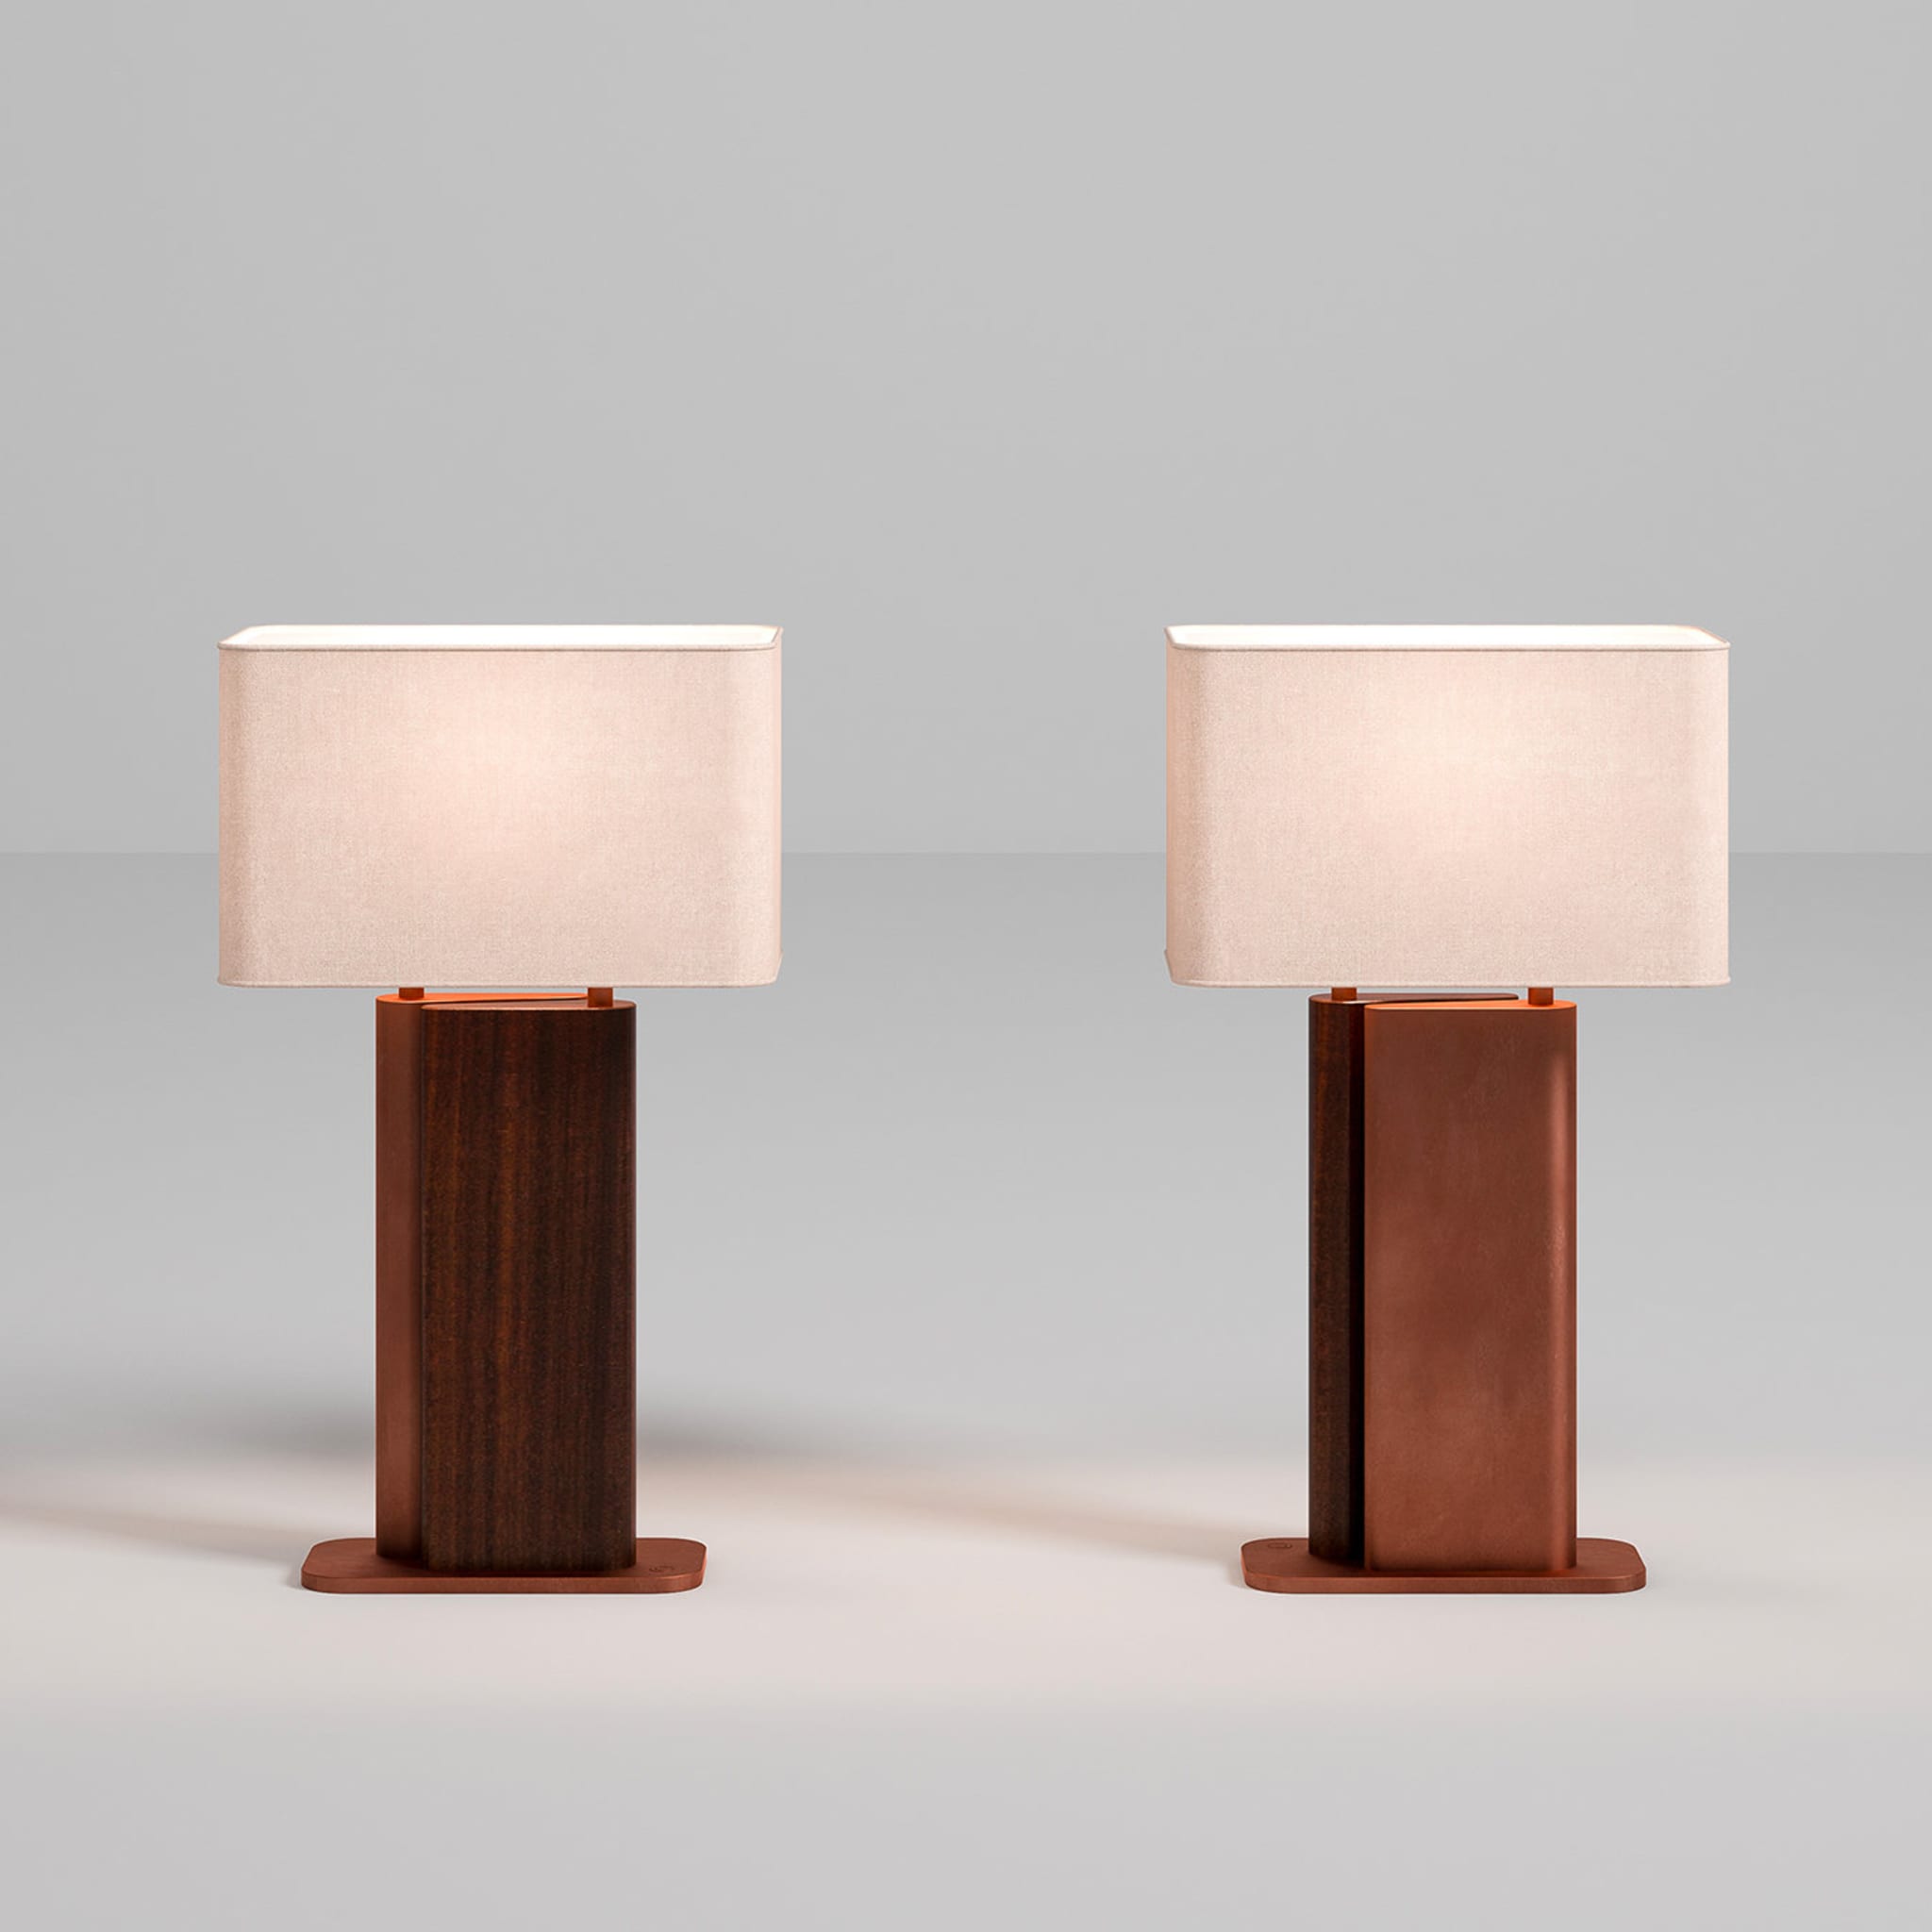 Wood and Metal Table Lamp - Alternative view 1